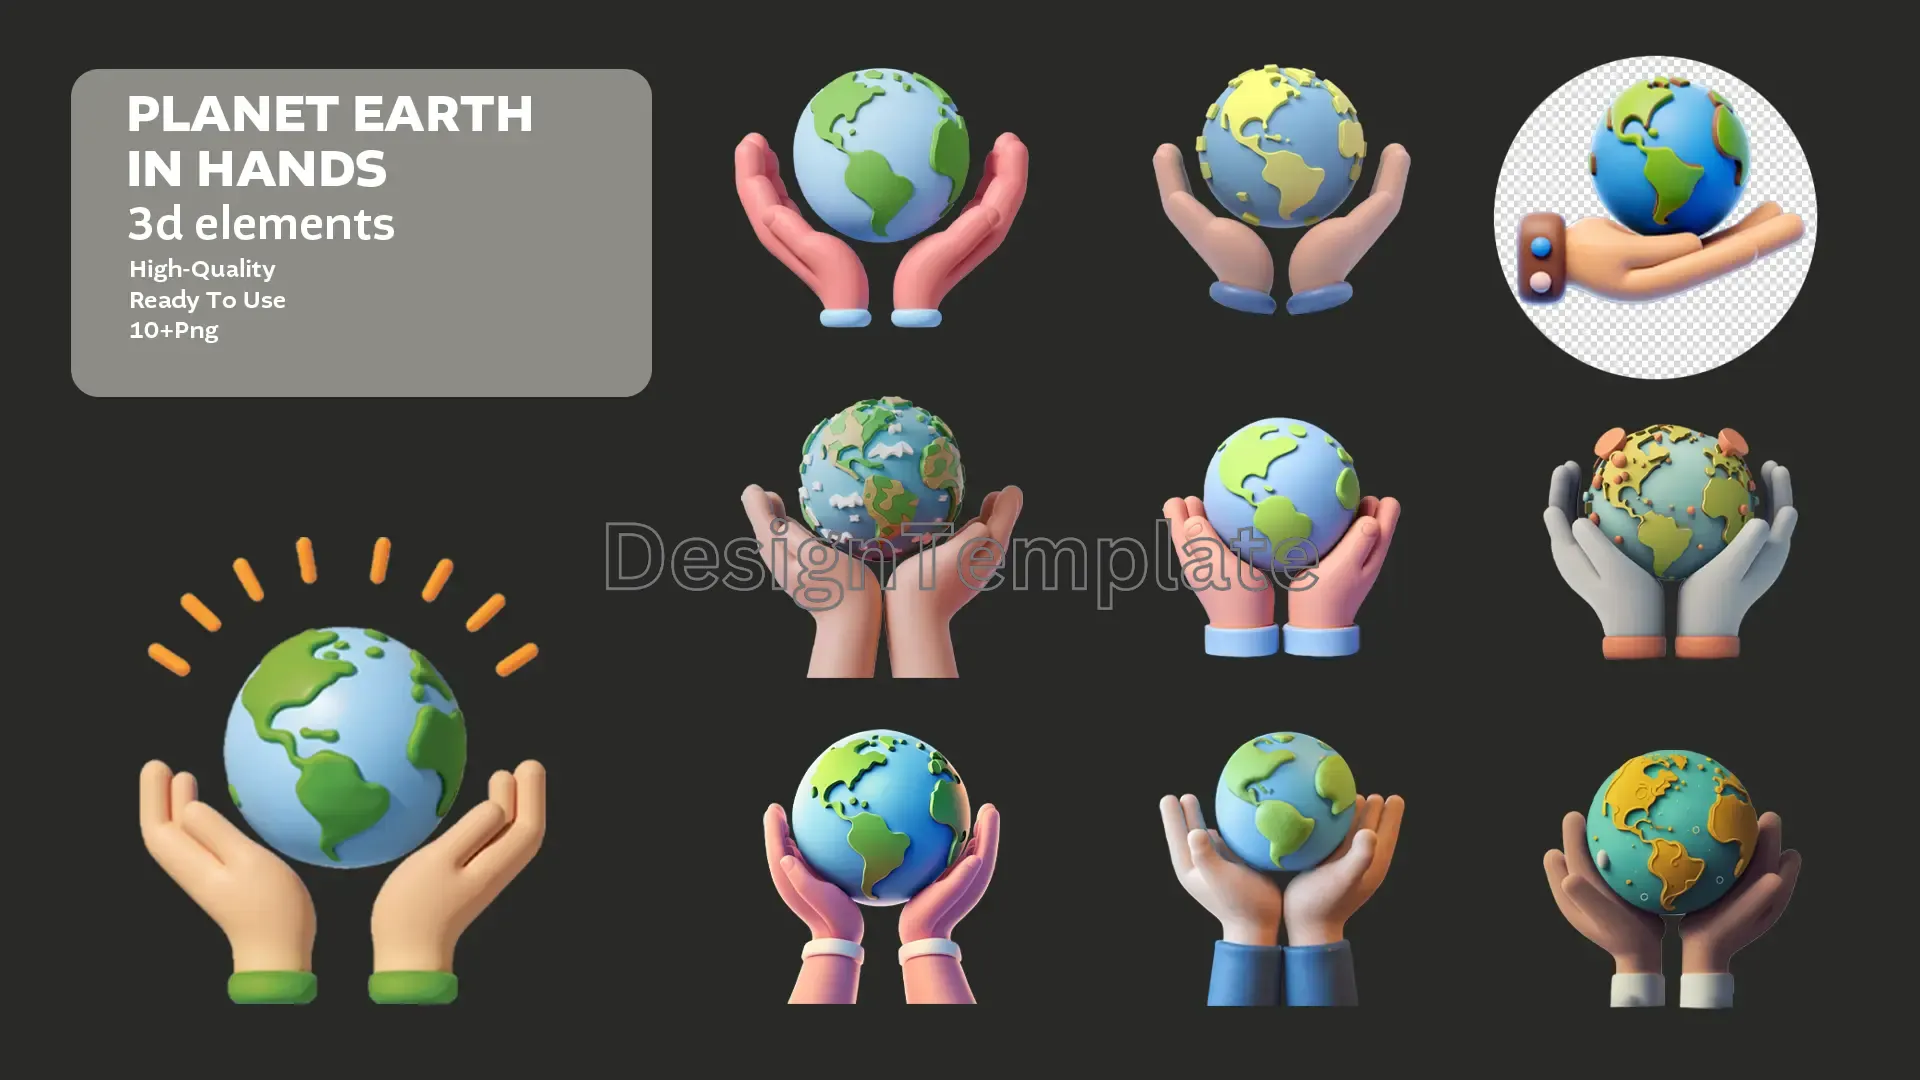 Global Grasp Planet Earth in Hands 3D Elements